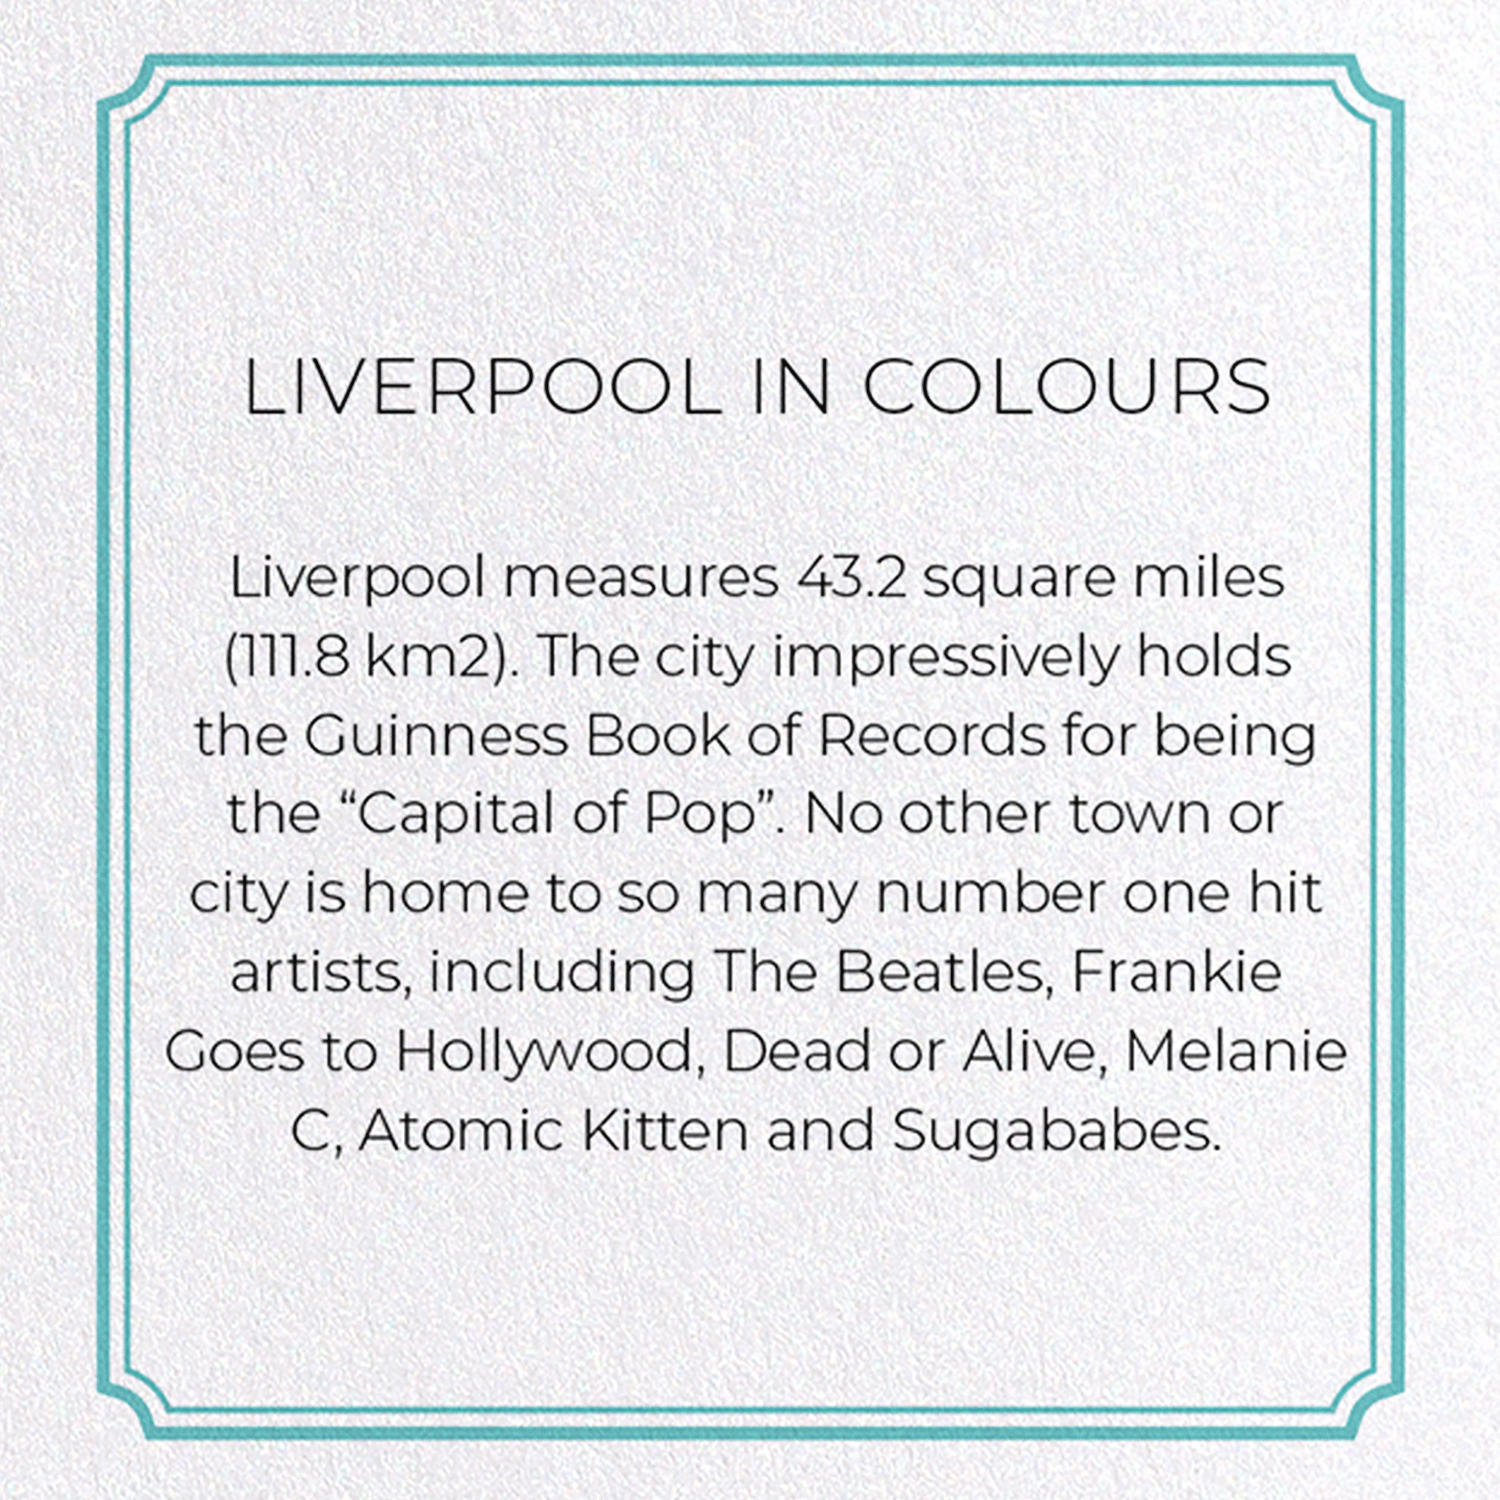 LIVERPOOL IN COLOURS